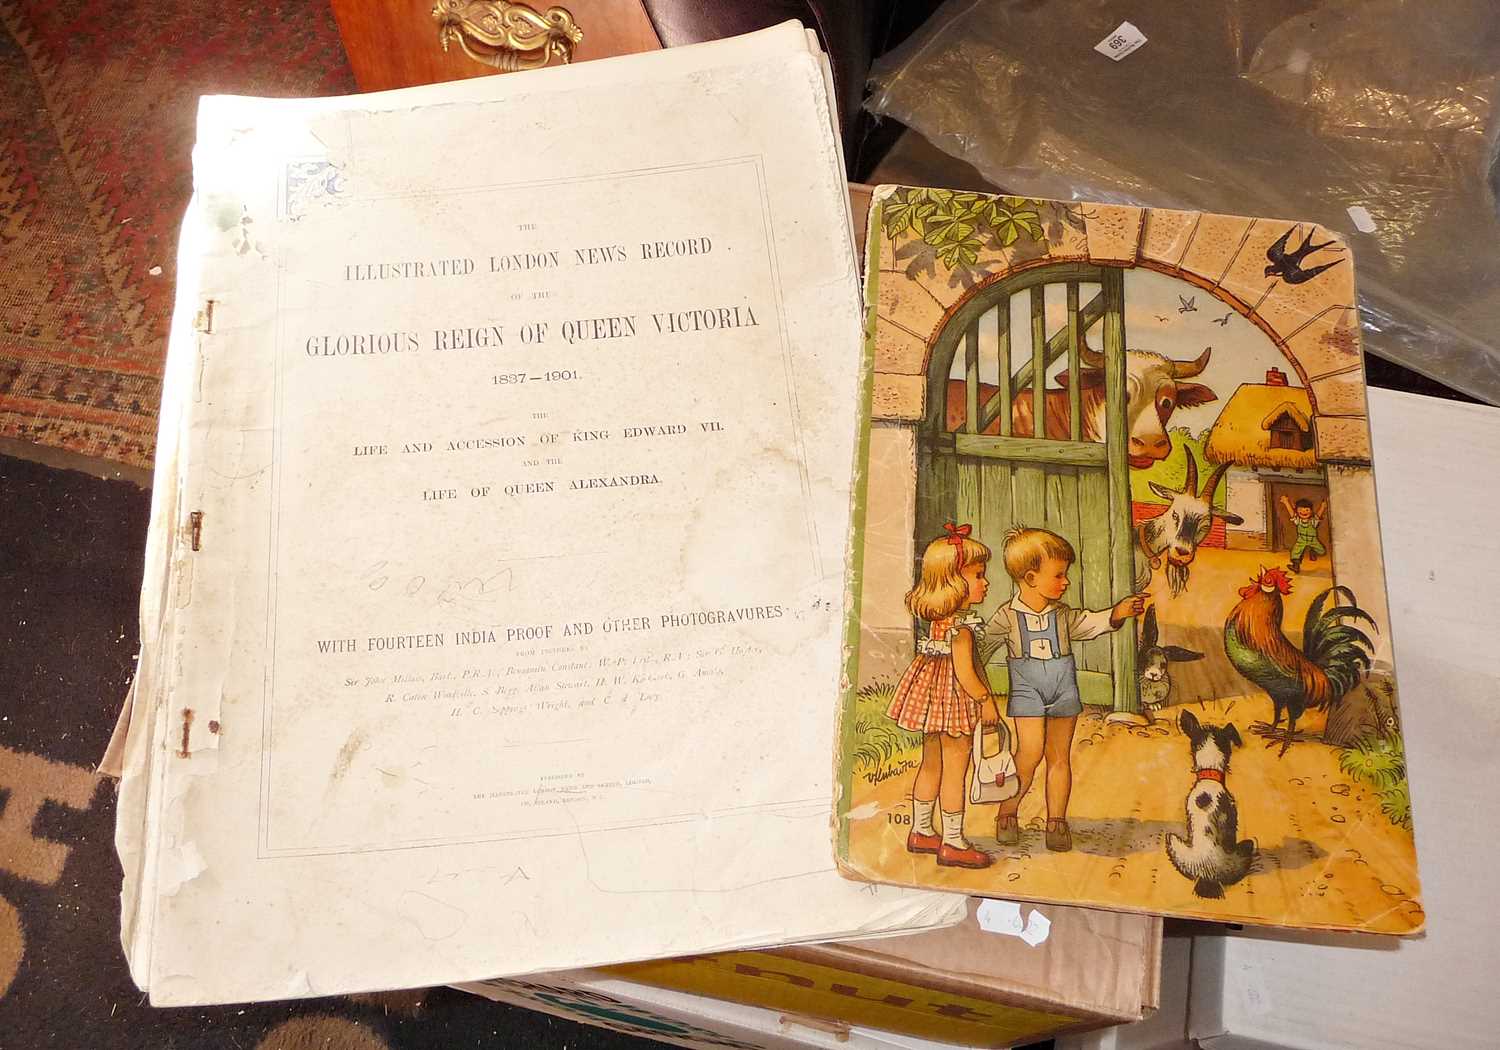 Illustrated London News Record of Queen Victoria's Reign and a part pop-up children's book of a